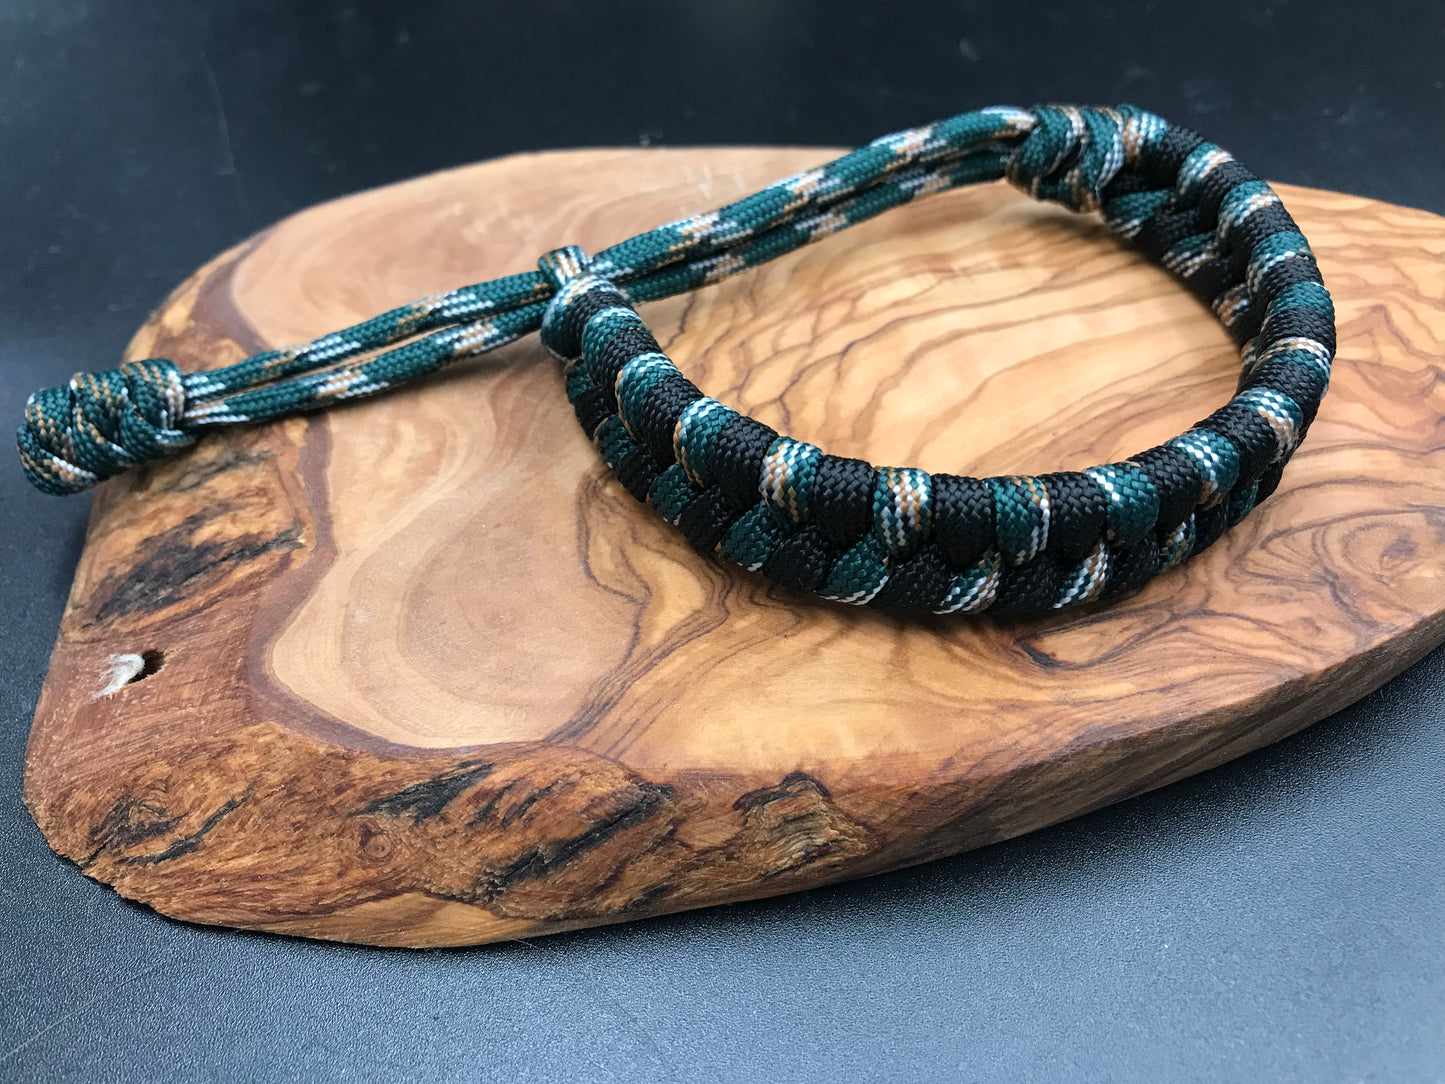 Handmade Paracord Fishtail weave bracelet in Urban camo (dark greens grey and white) and black for the tactical striped pattern look 